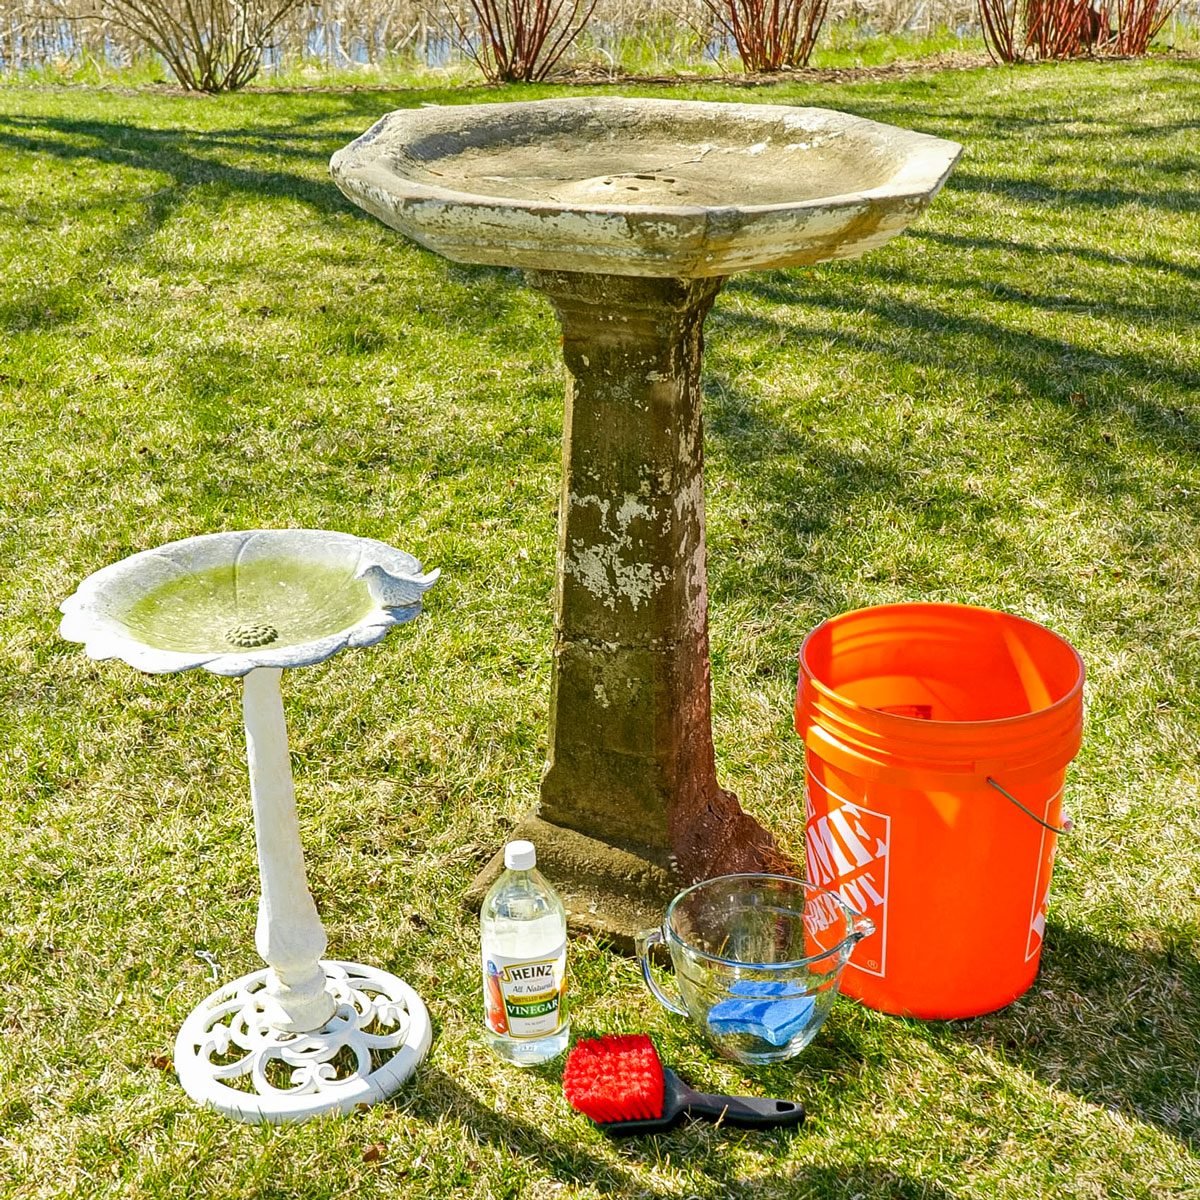 How To Clean a Birdbath the Right Way